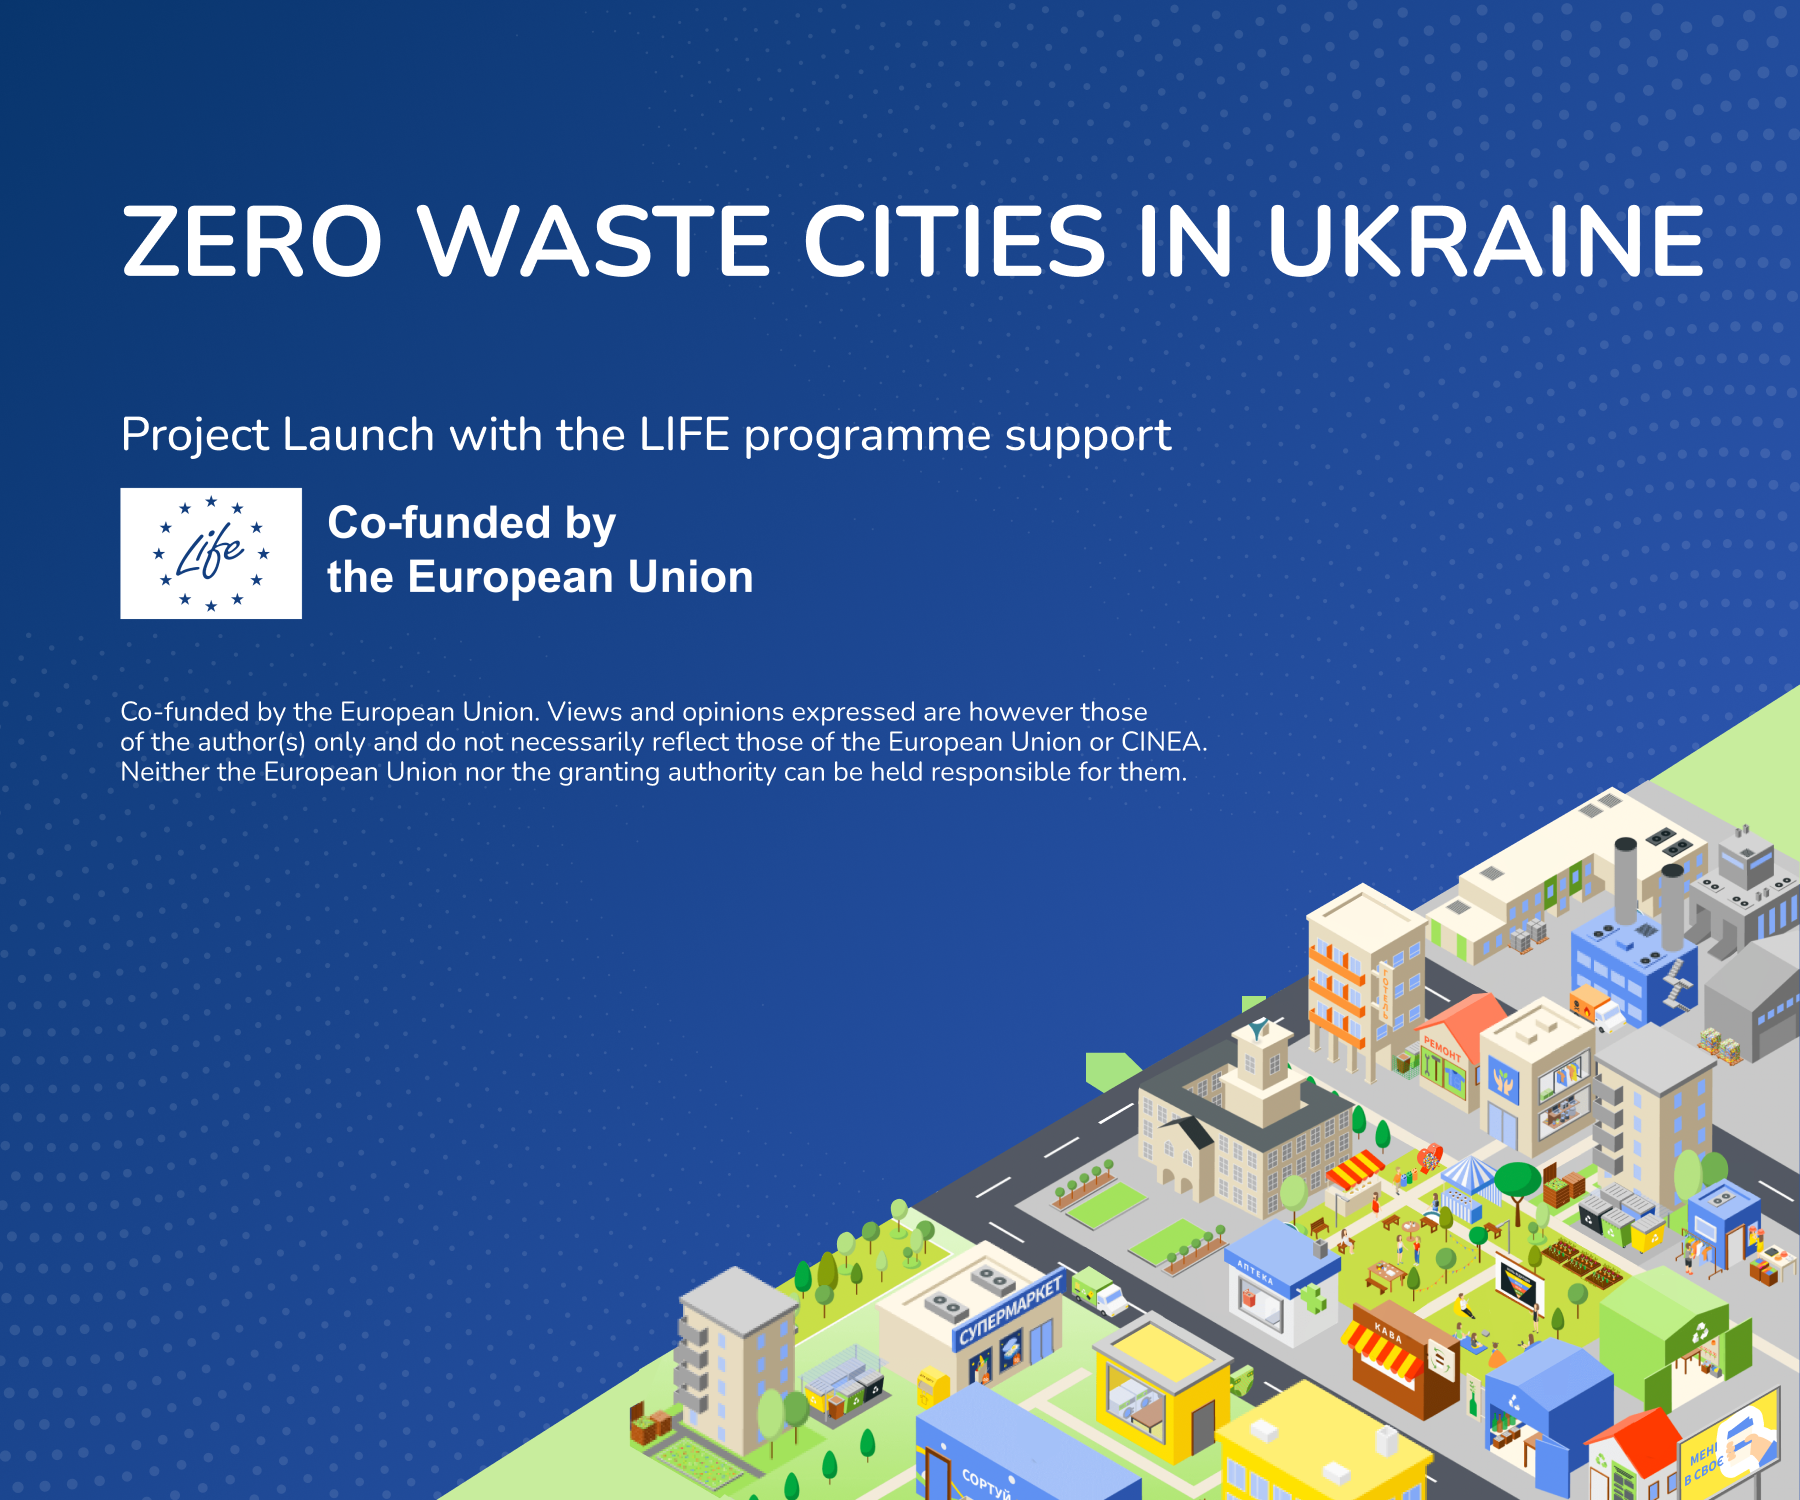 Zero Waste Cities in Ukraine Project Launch with the LIFE programme support.